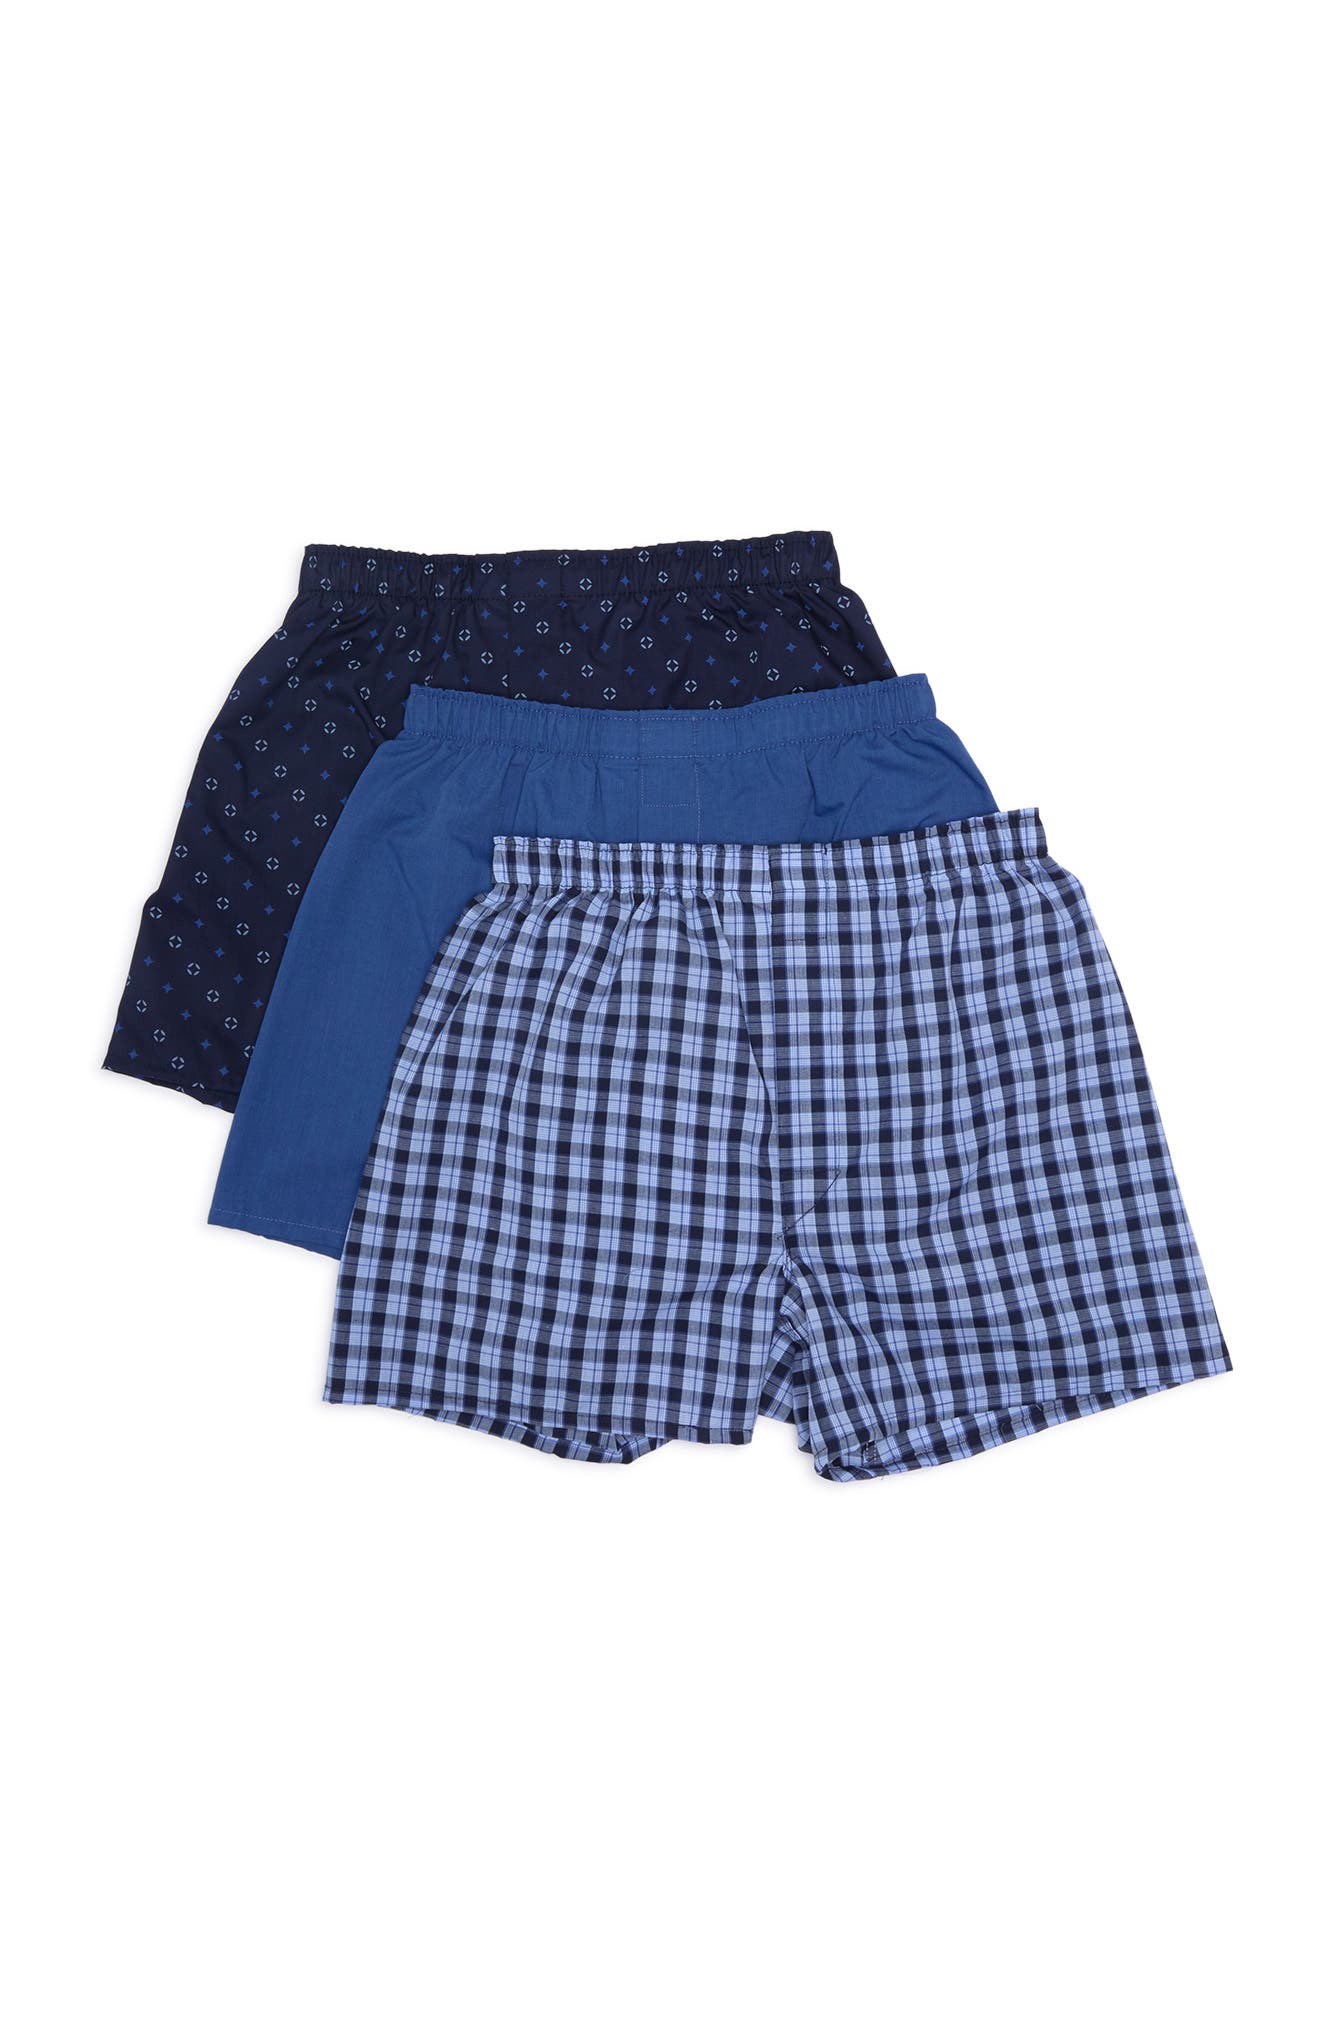 Nordstrom Woven Boxer In Navy Plaid Geo Pack